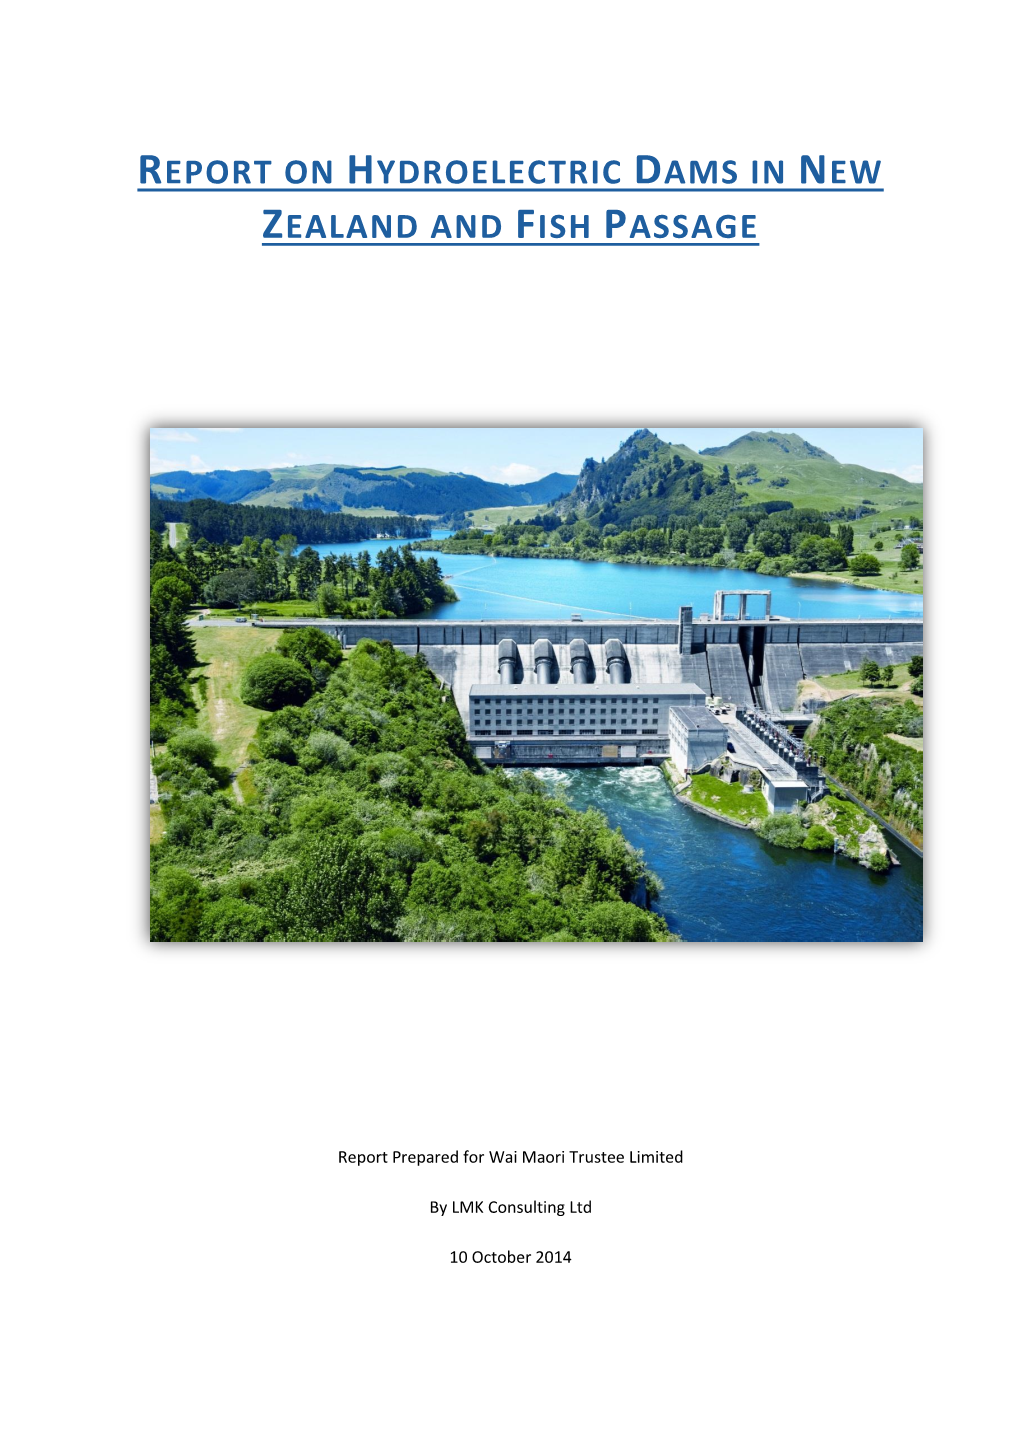 Report on Hydroelectric Dams in New Zealand and Fish Passage